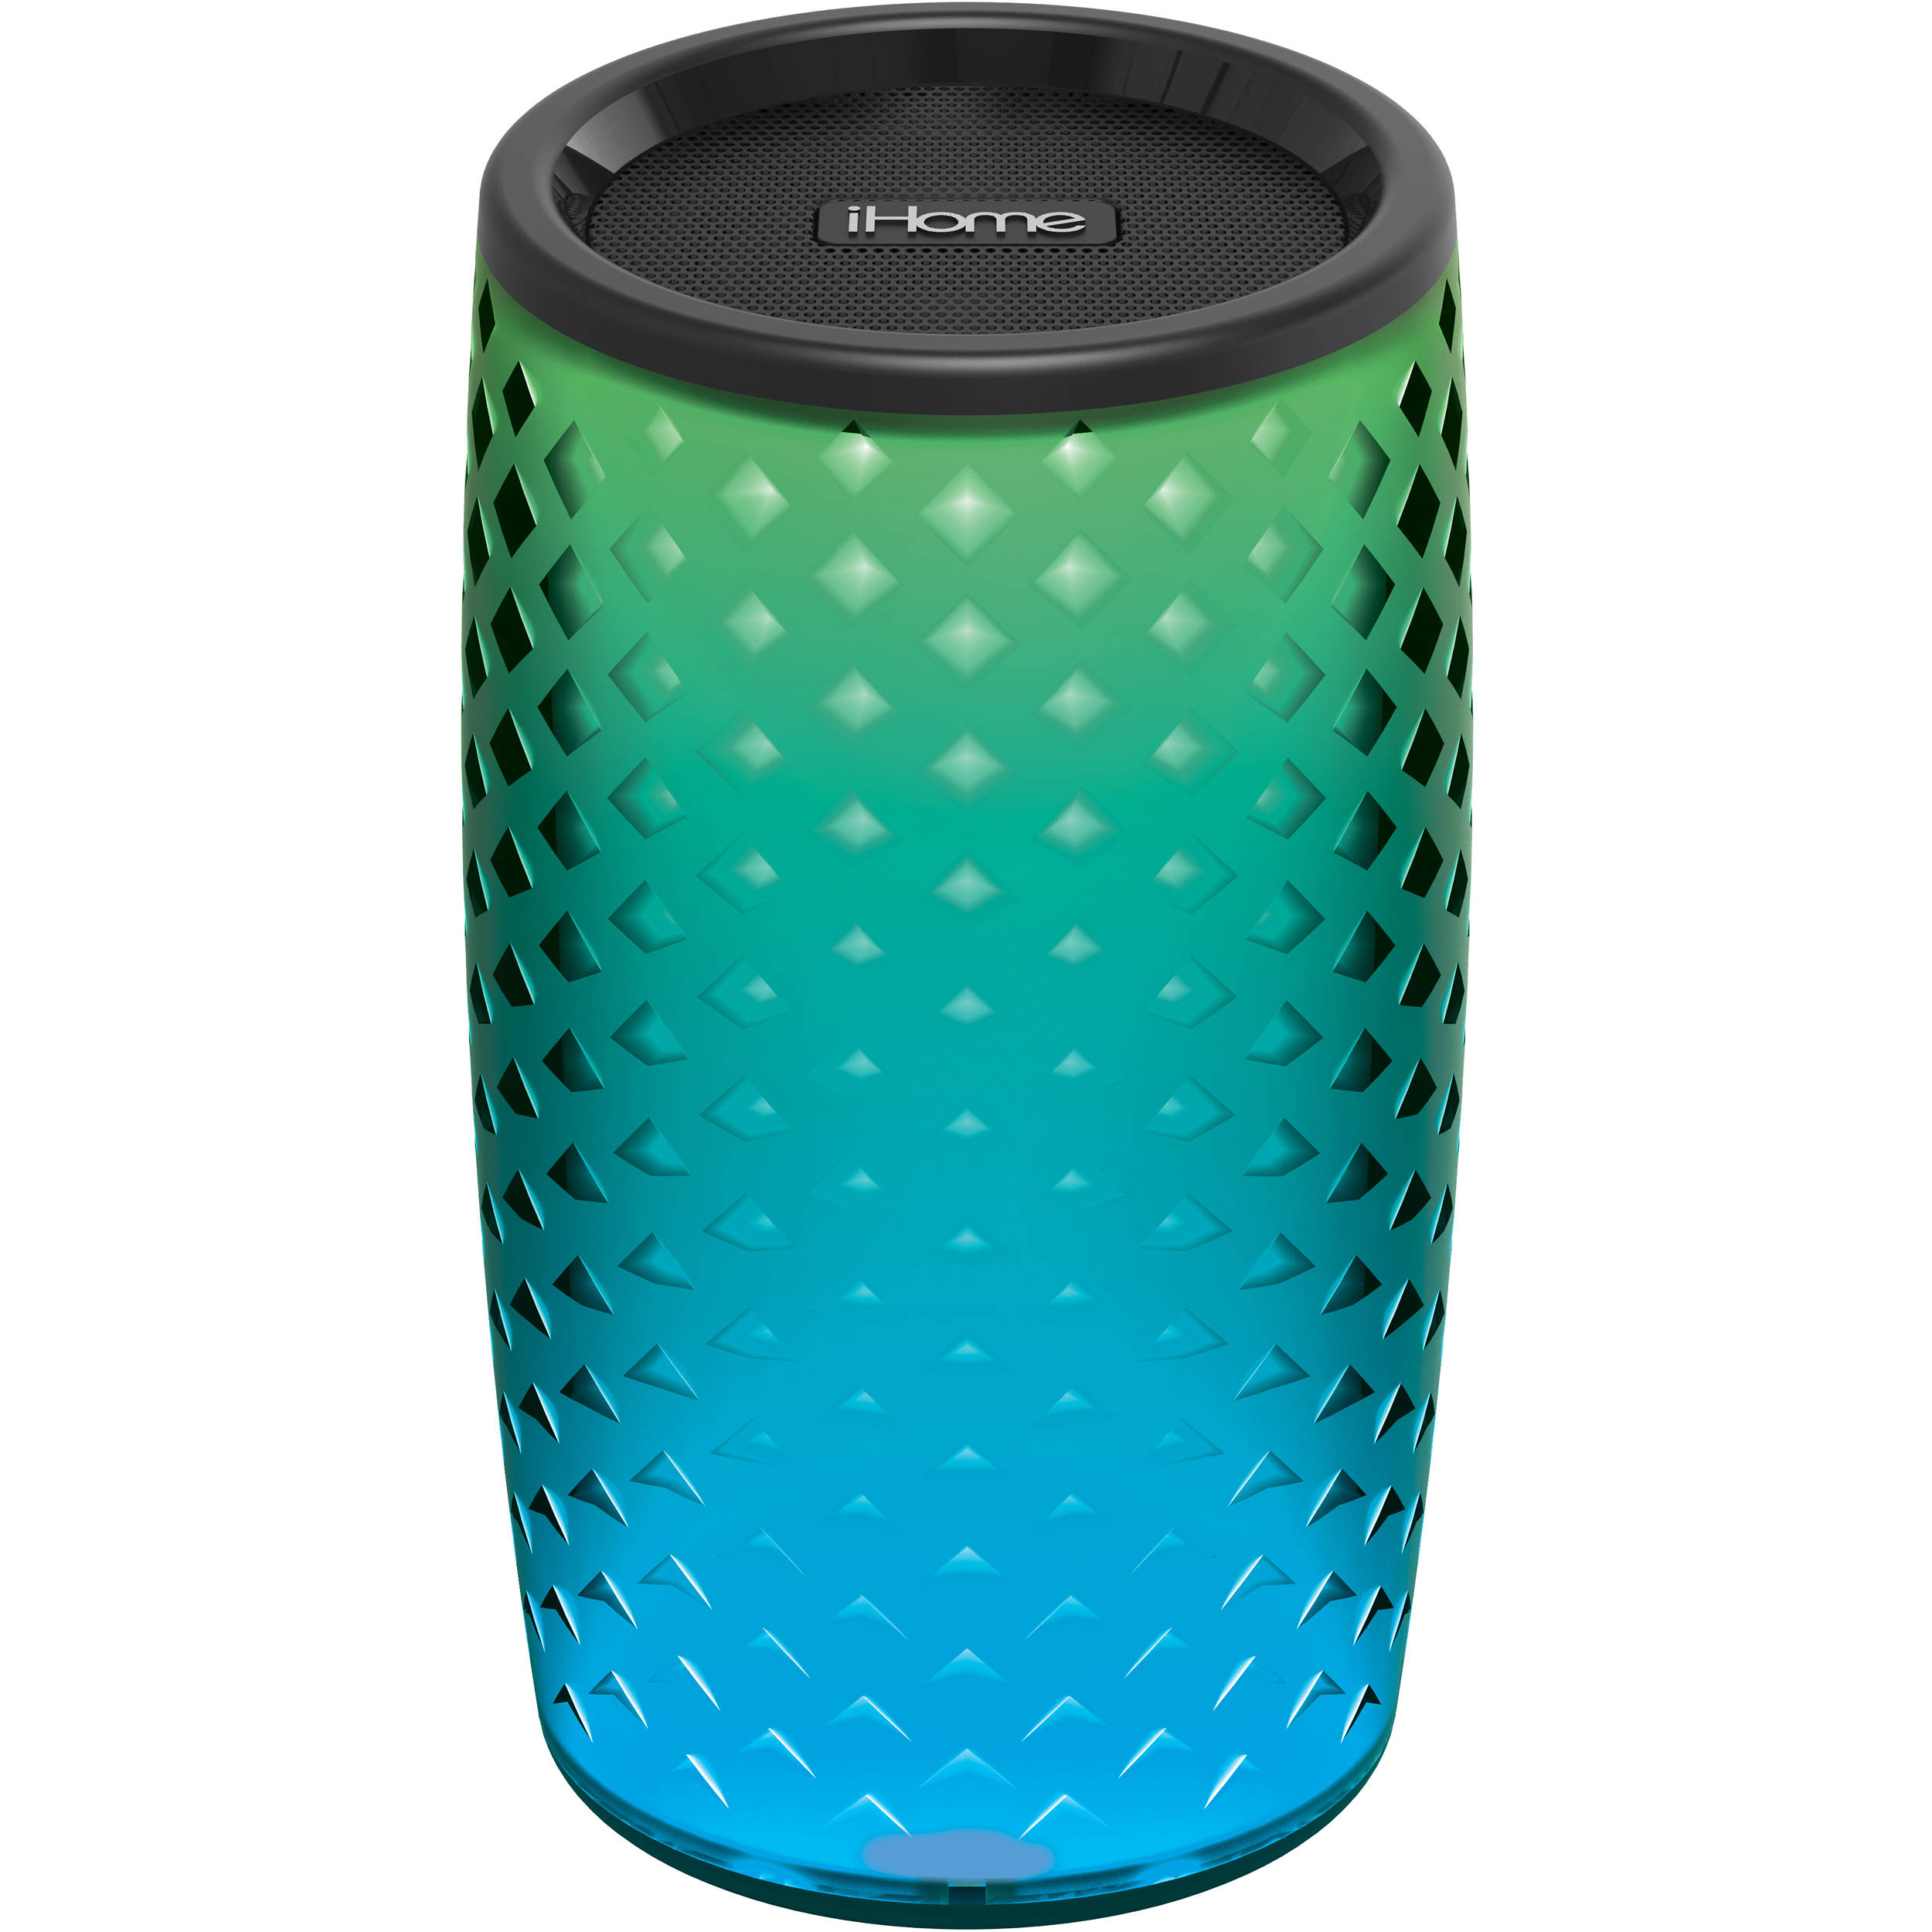 ihome color changing rechargeable wireless speaker